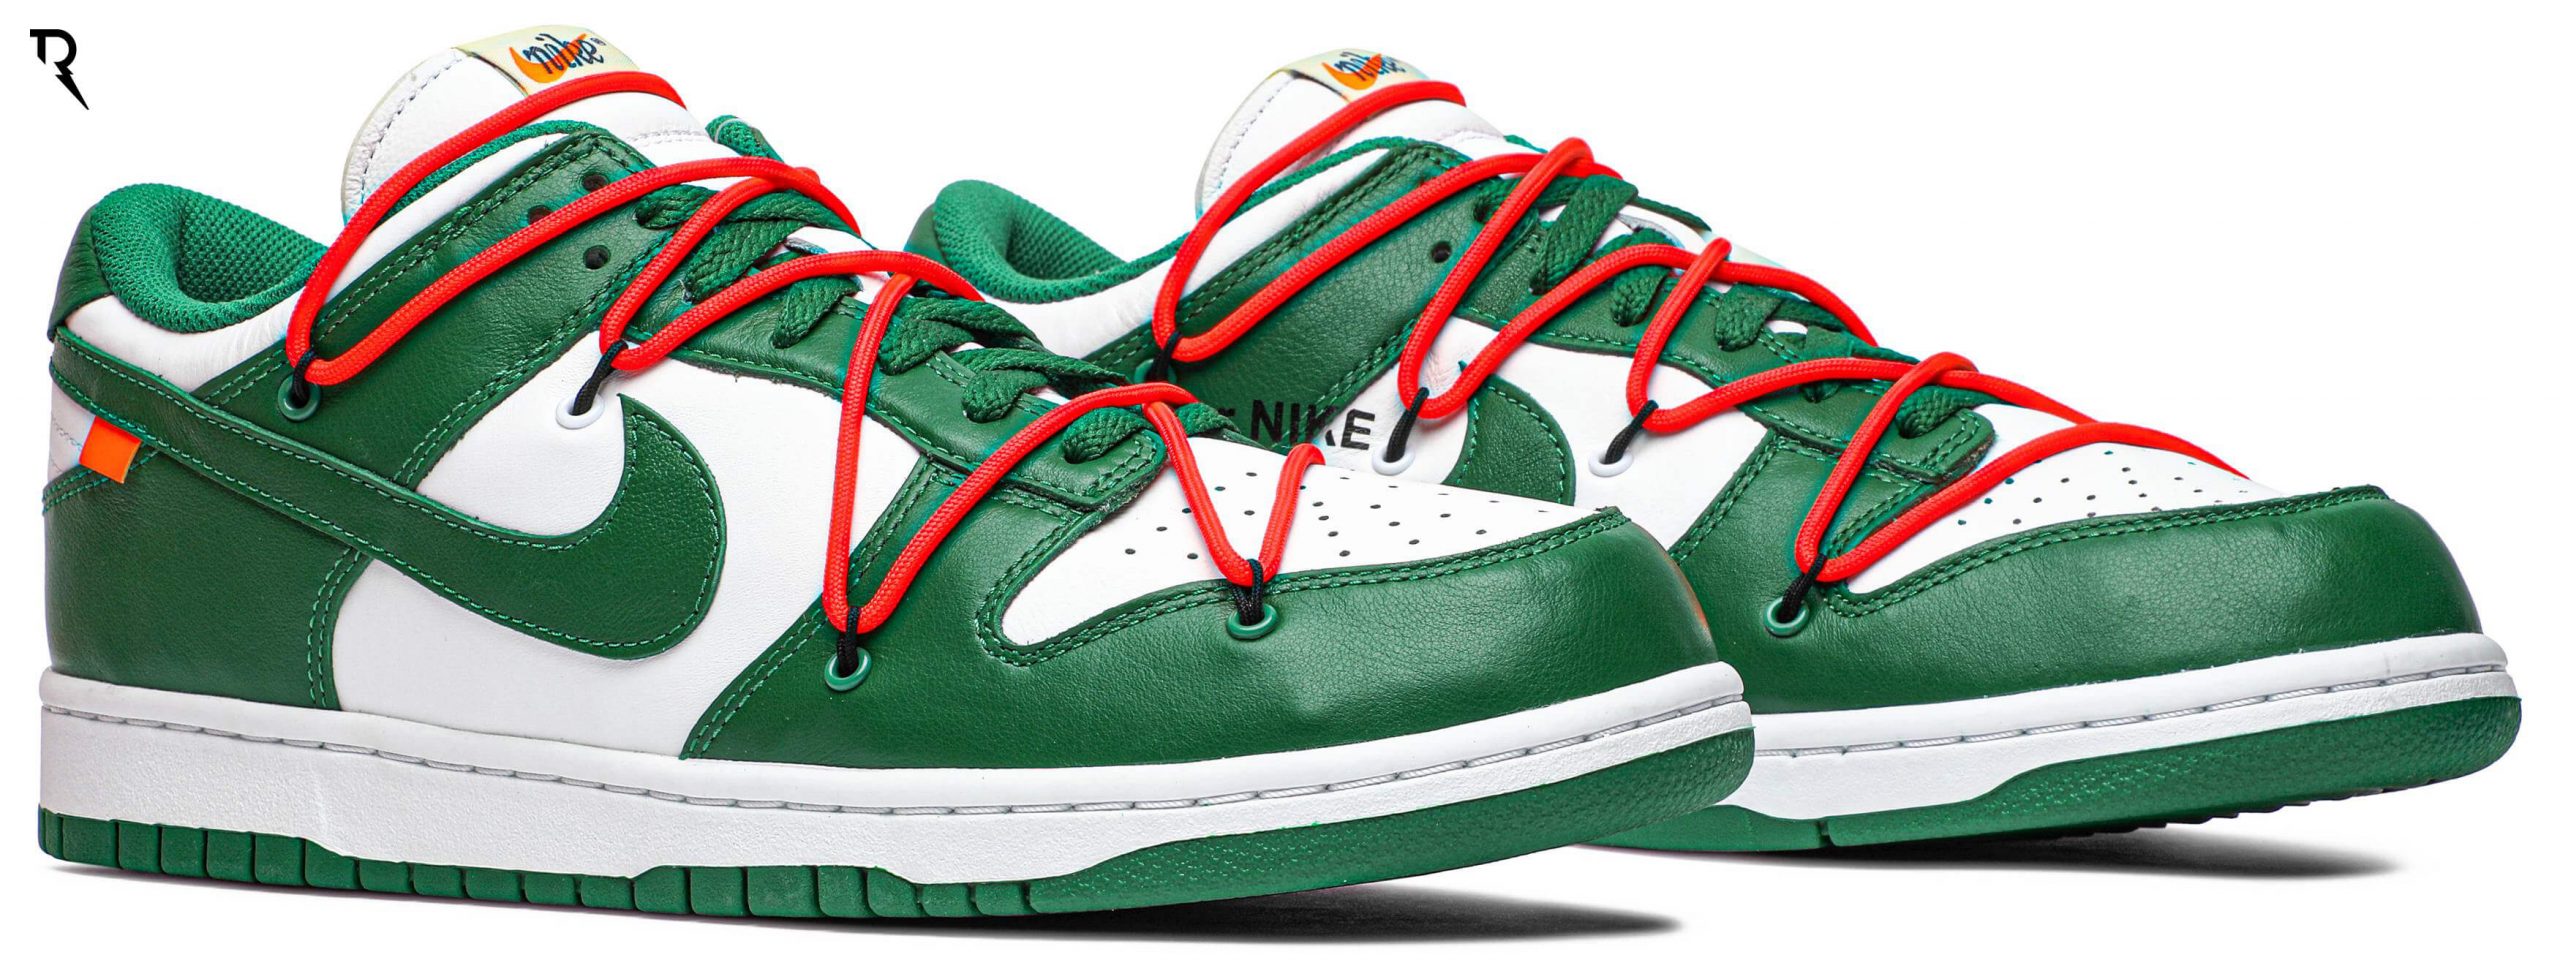 Off-White x Dunk Low 'Pine Green' - Nike - CT0856 100